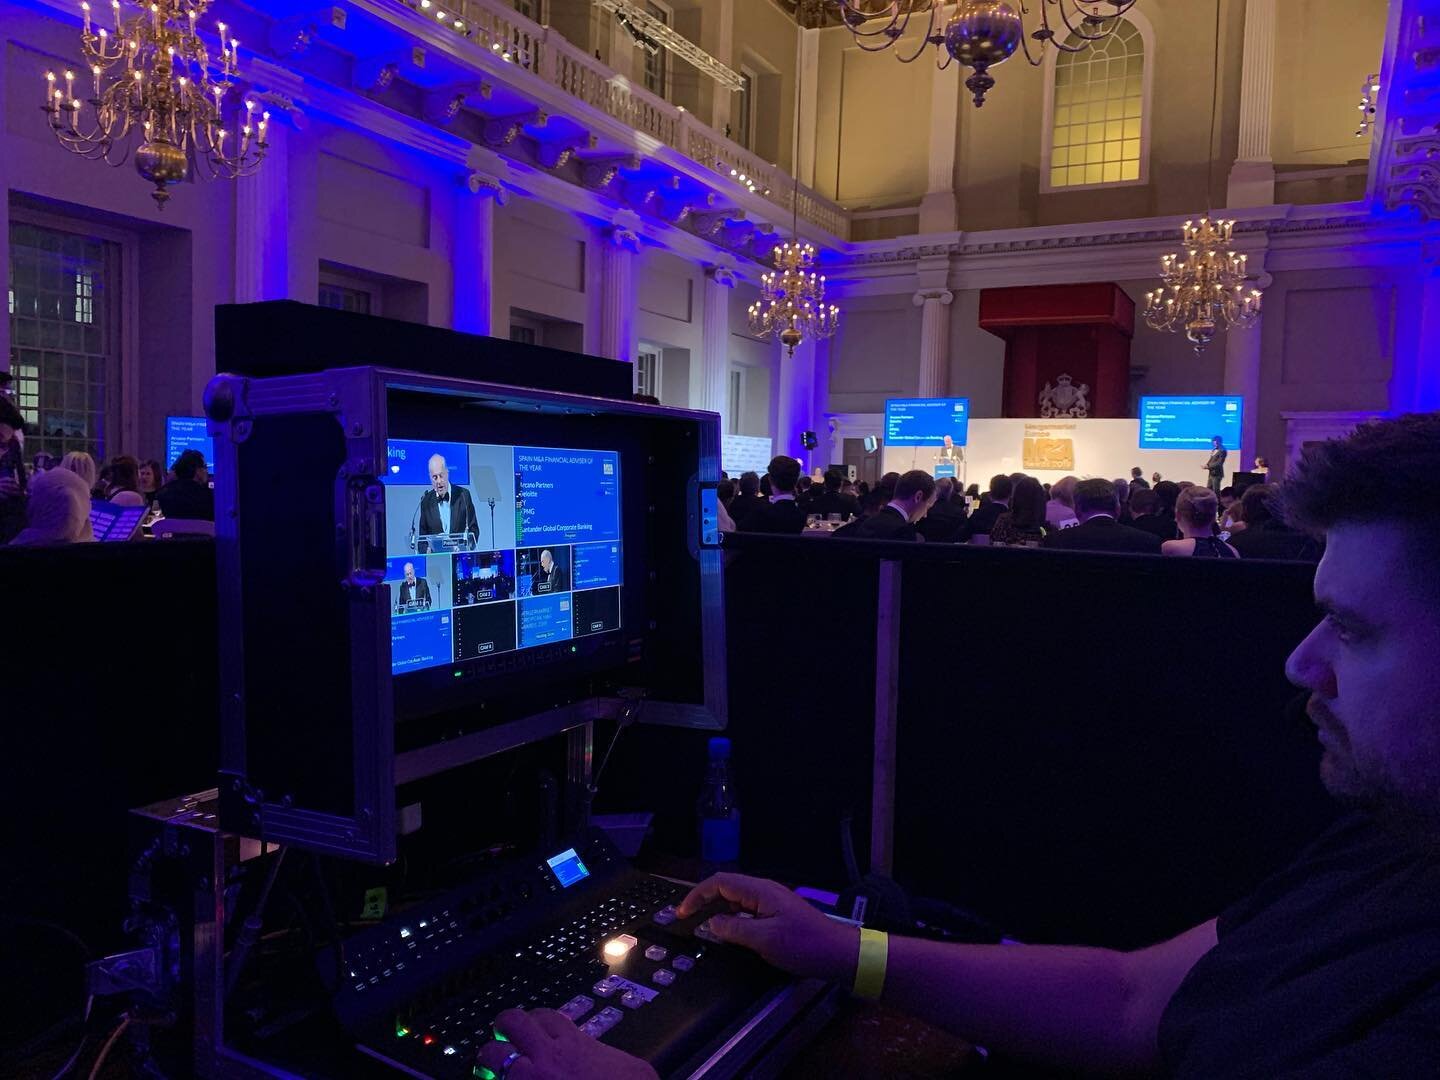 Renegade David Wells vision mixing an awards ceremony at Banqueting Hall for a live stream of proceedings.  Only problem No internet in the building!  Luckily our LiveU Solo encoders can stream ultra reliably over multiple 4G/5G mobile connections.. 